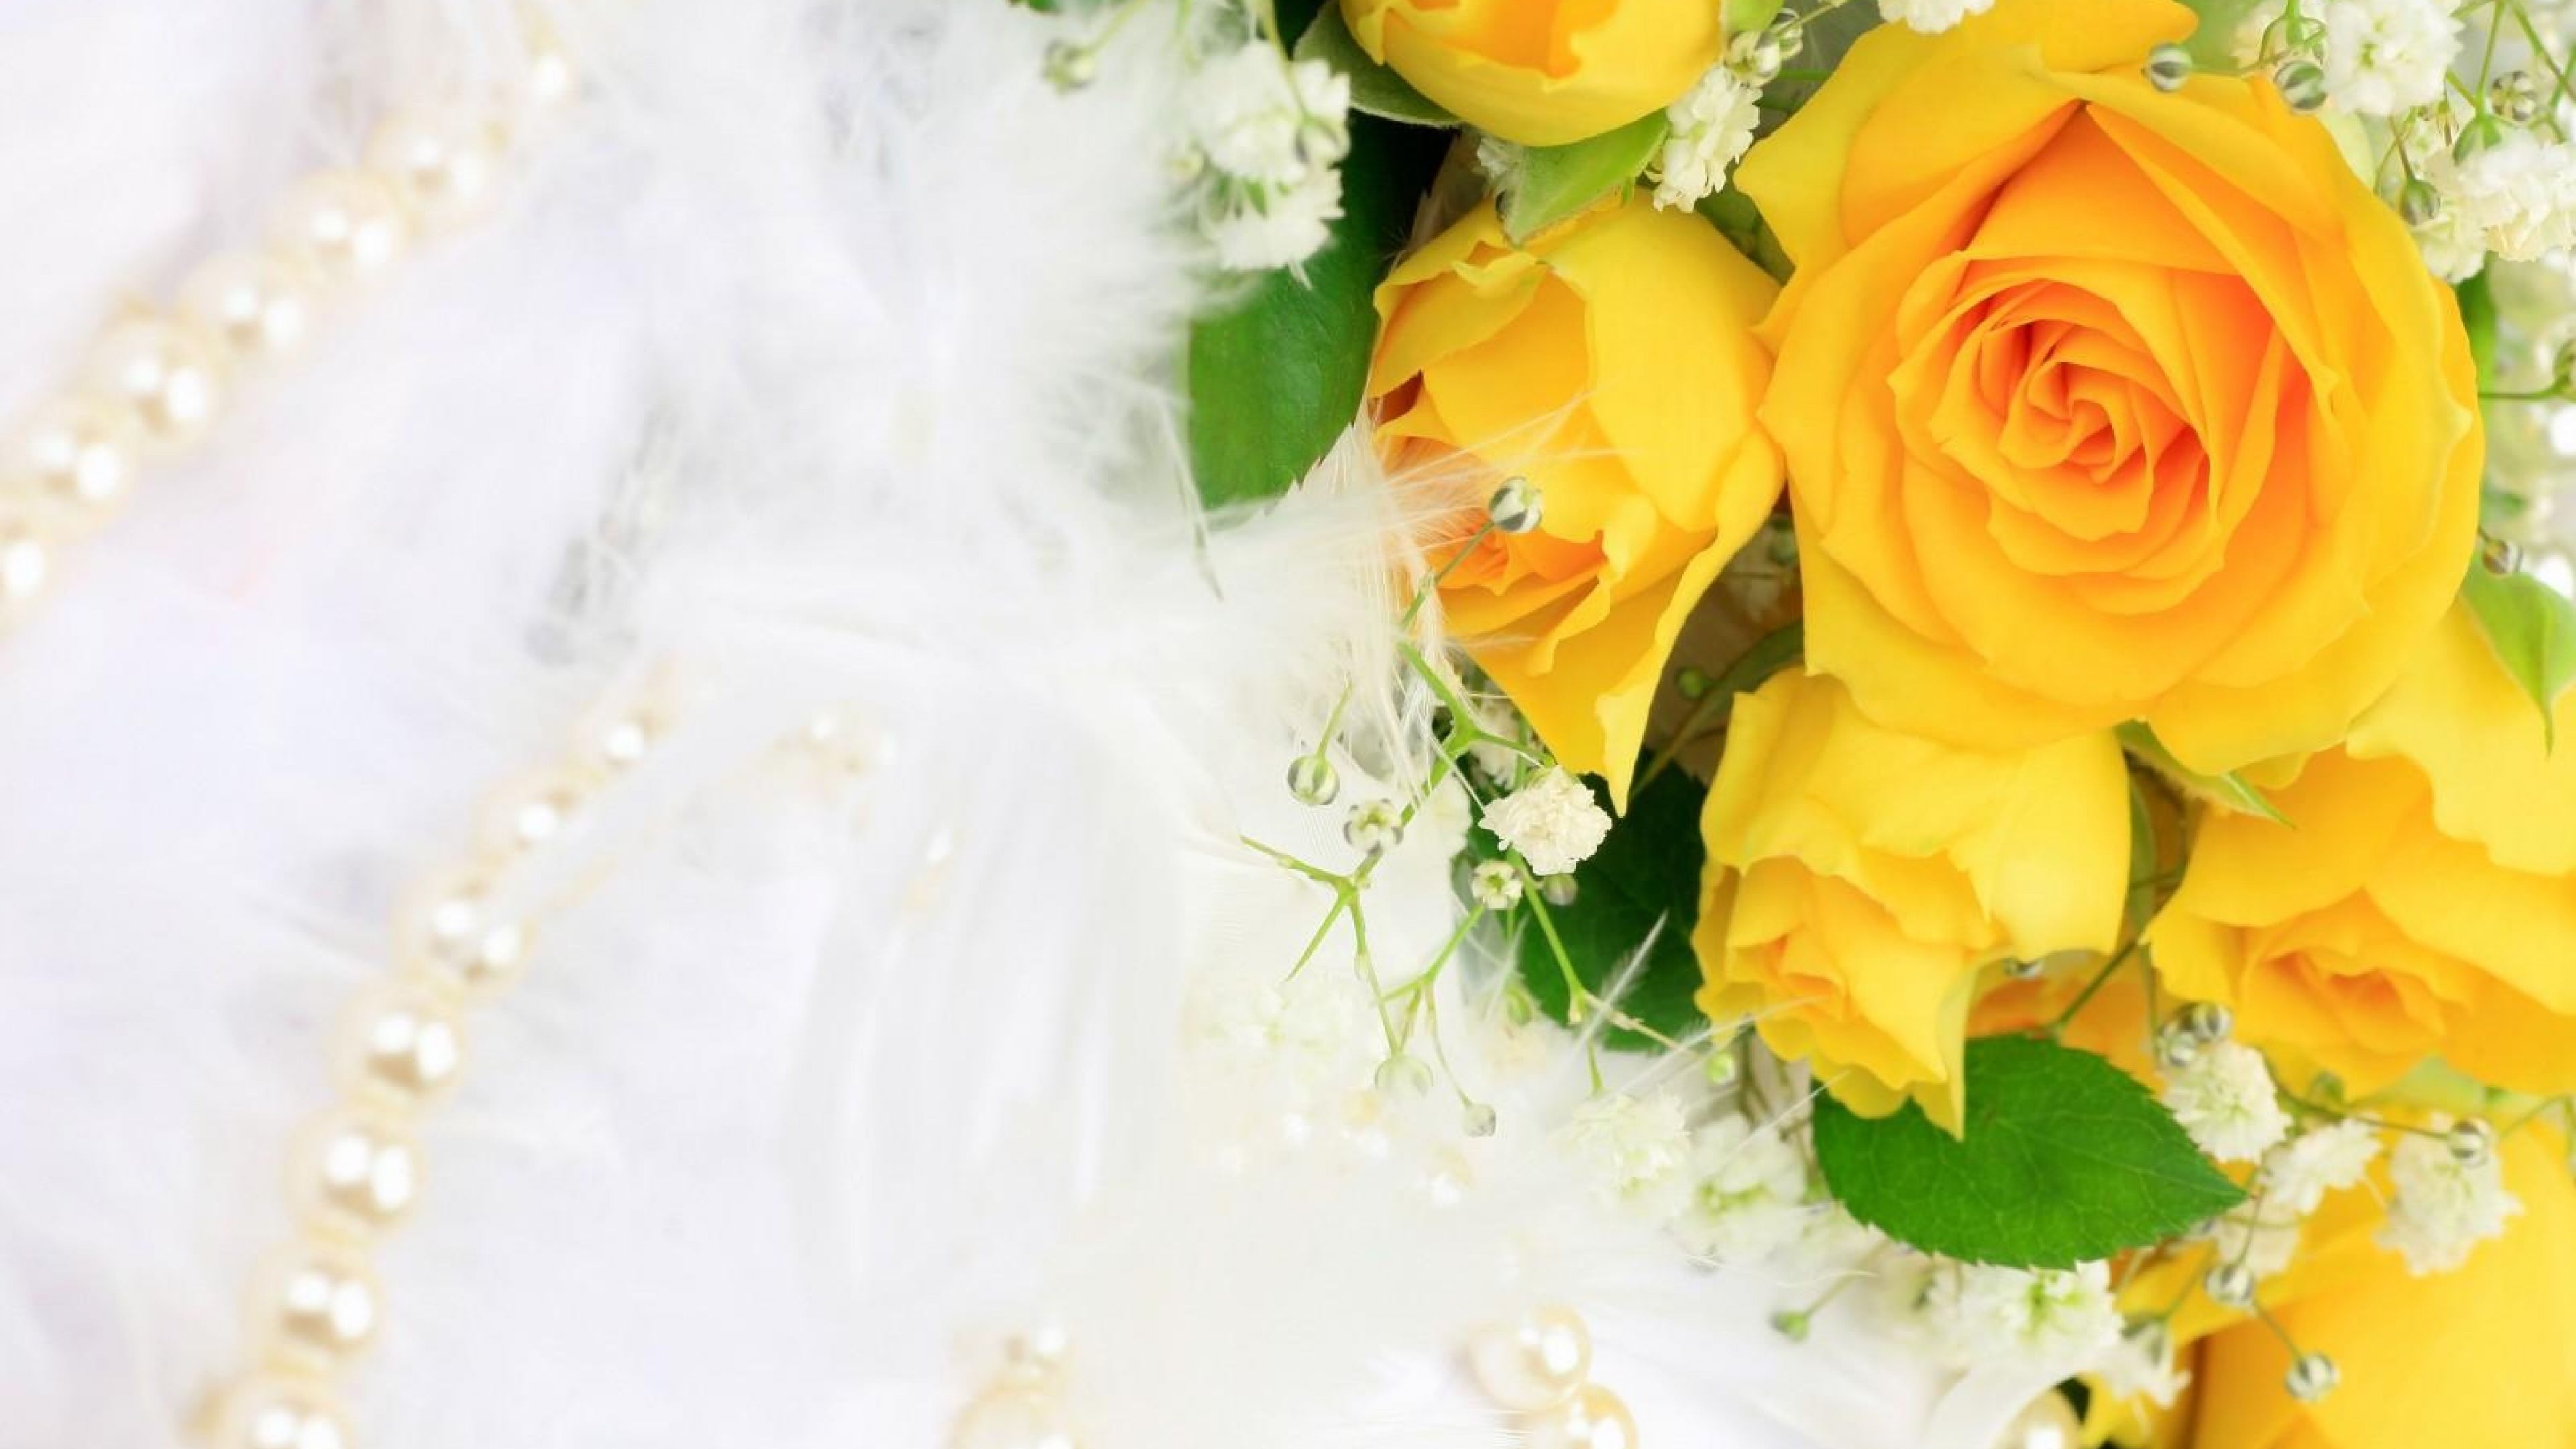 Download Wallpaper 3840x2160 Roses, Flowers, Flower, Yellow